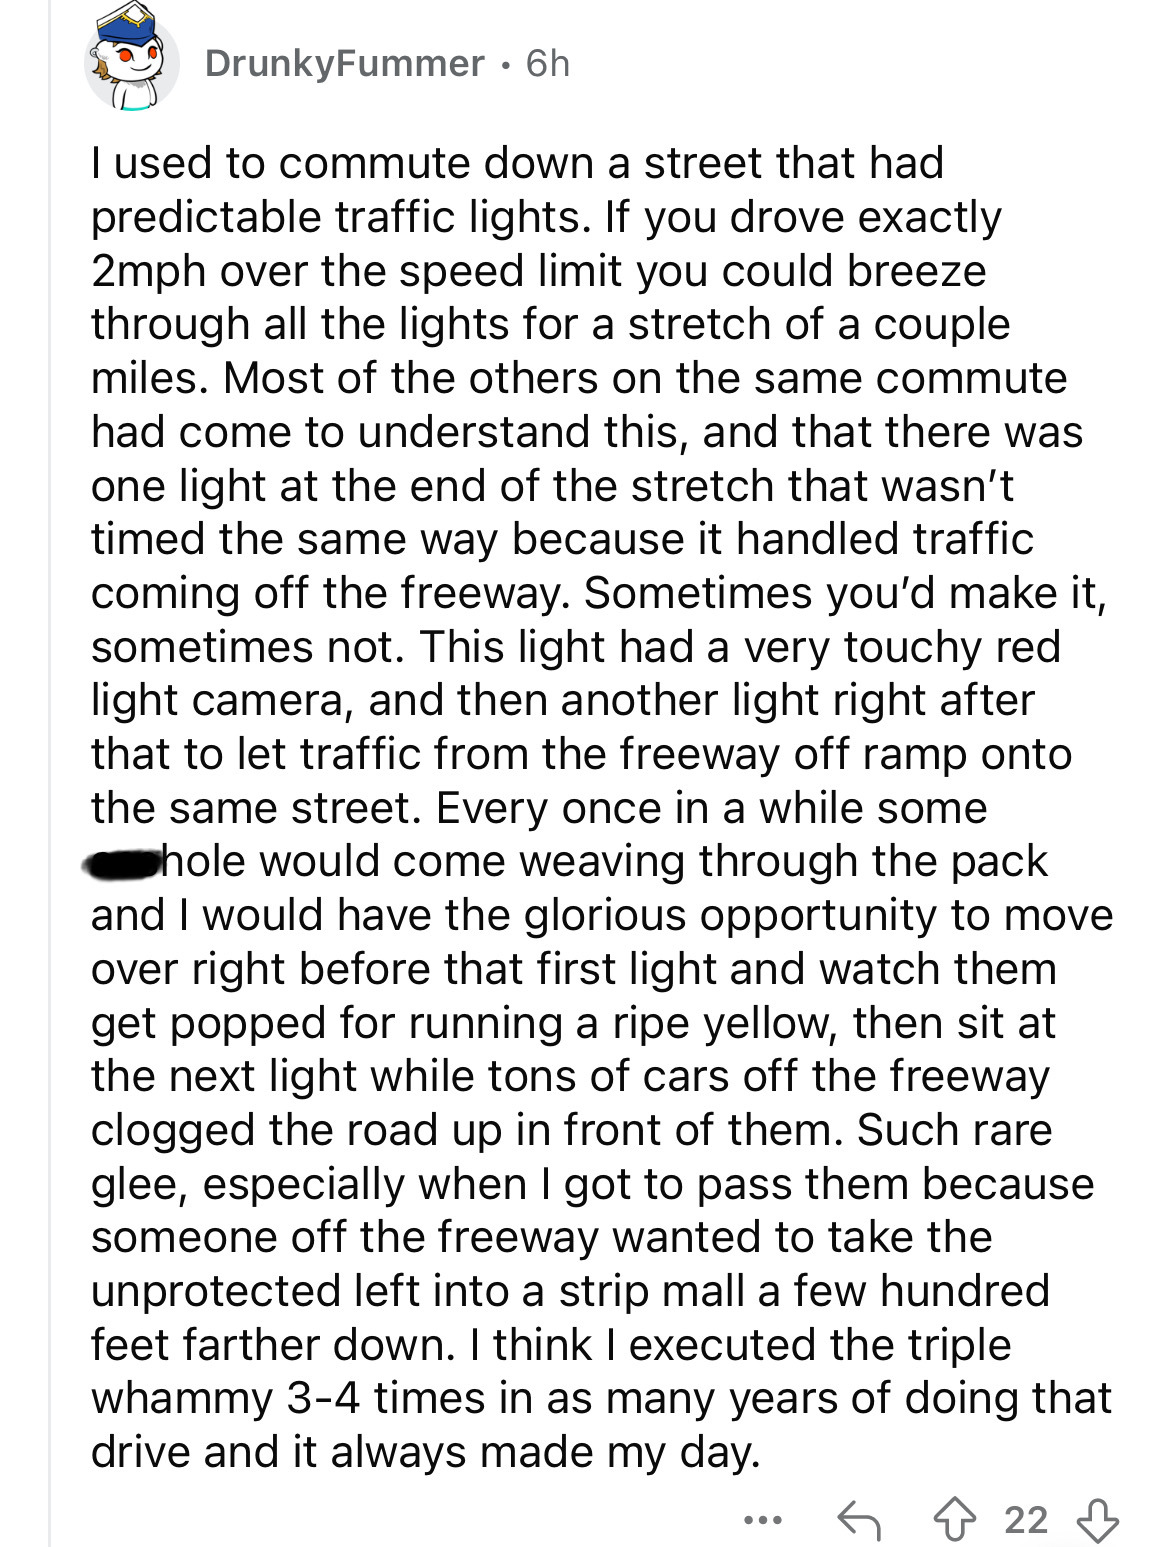 document - DrunkyFummer 6h I used to commute down a street that had predictable traffic lights. If you drove exactly 2mph over the speed limit you could breeze through all the lights for a stretch of a couple miles. Most of the others on the same commute 